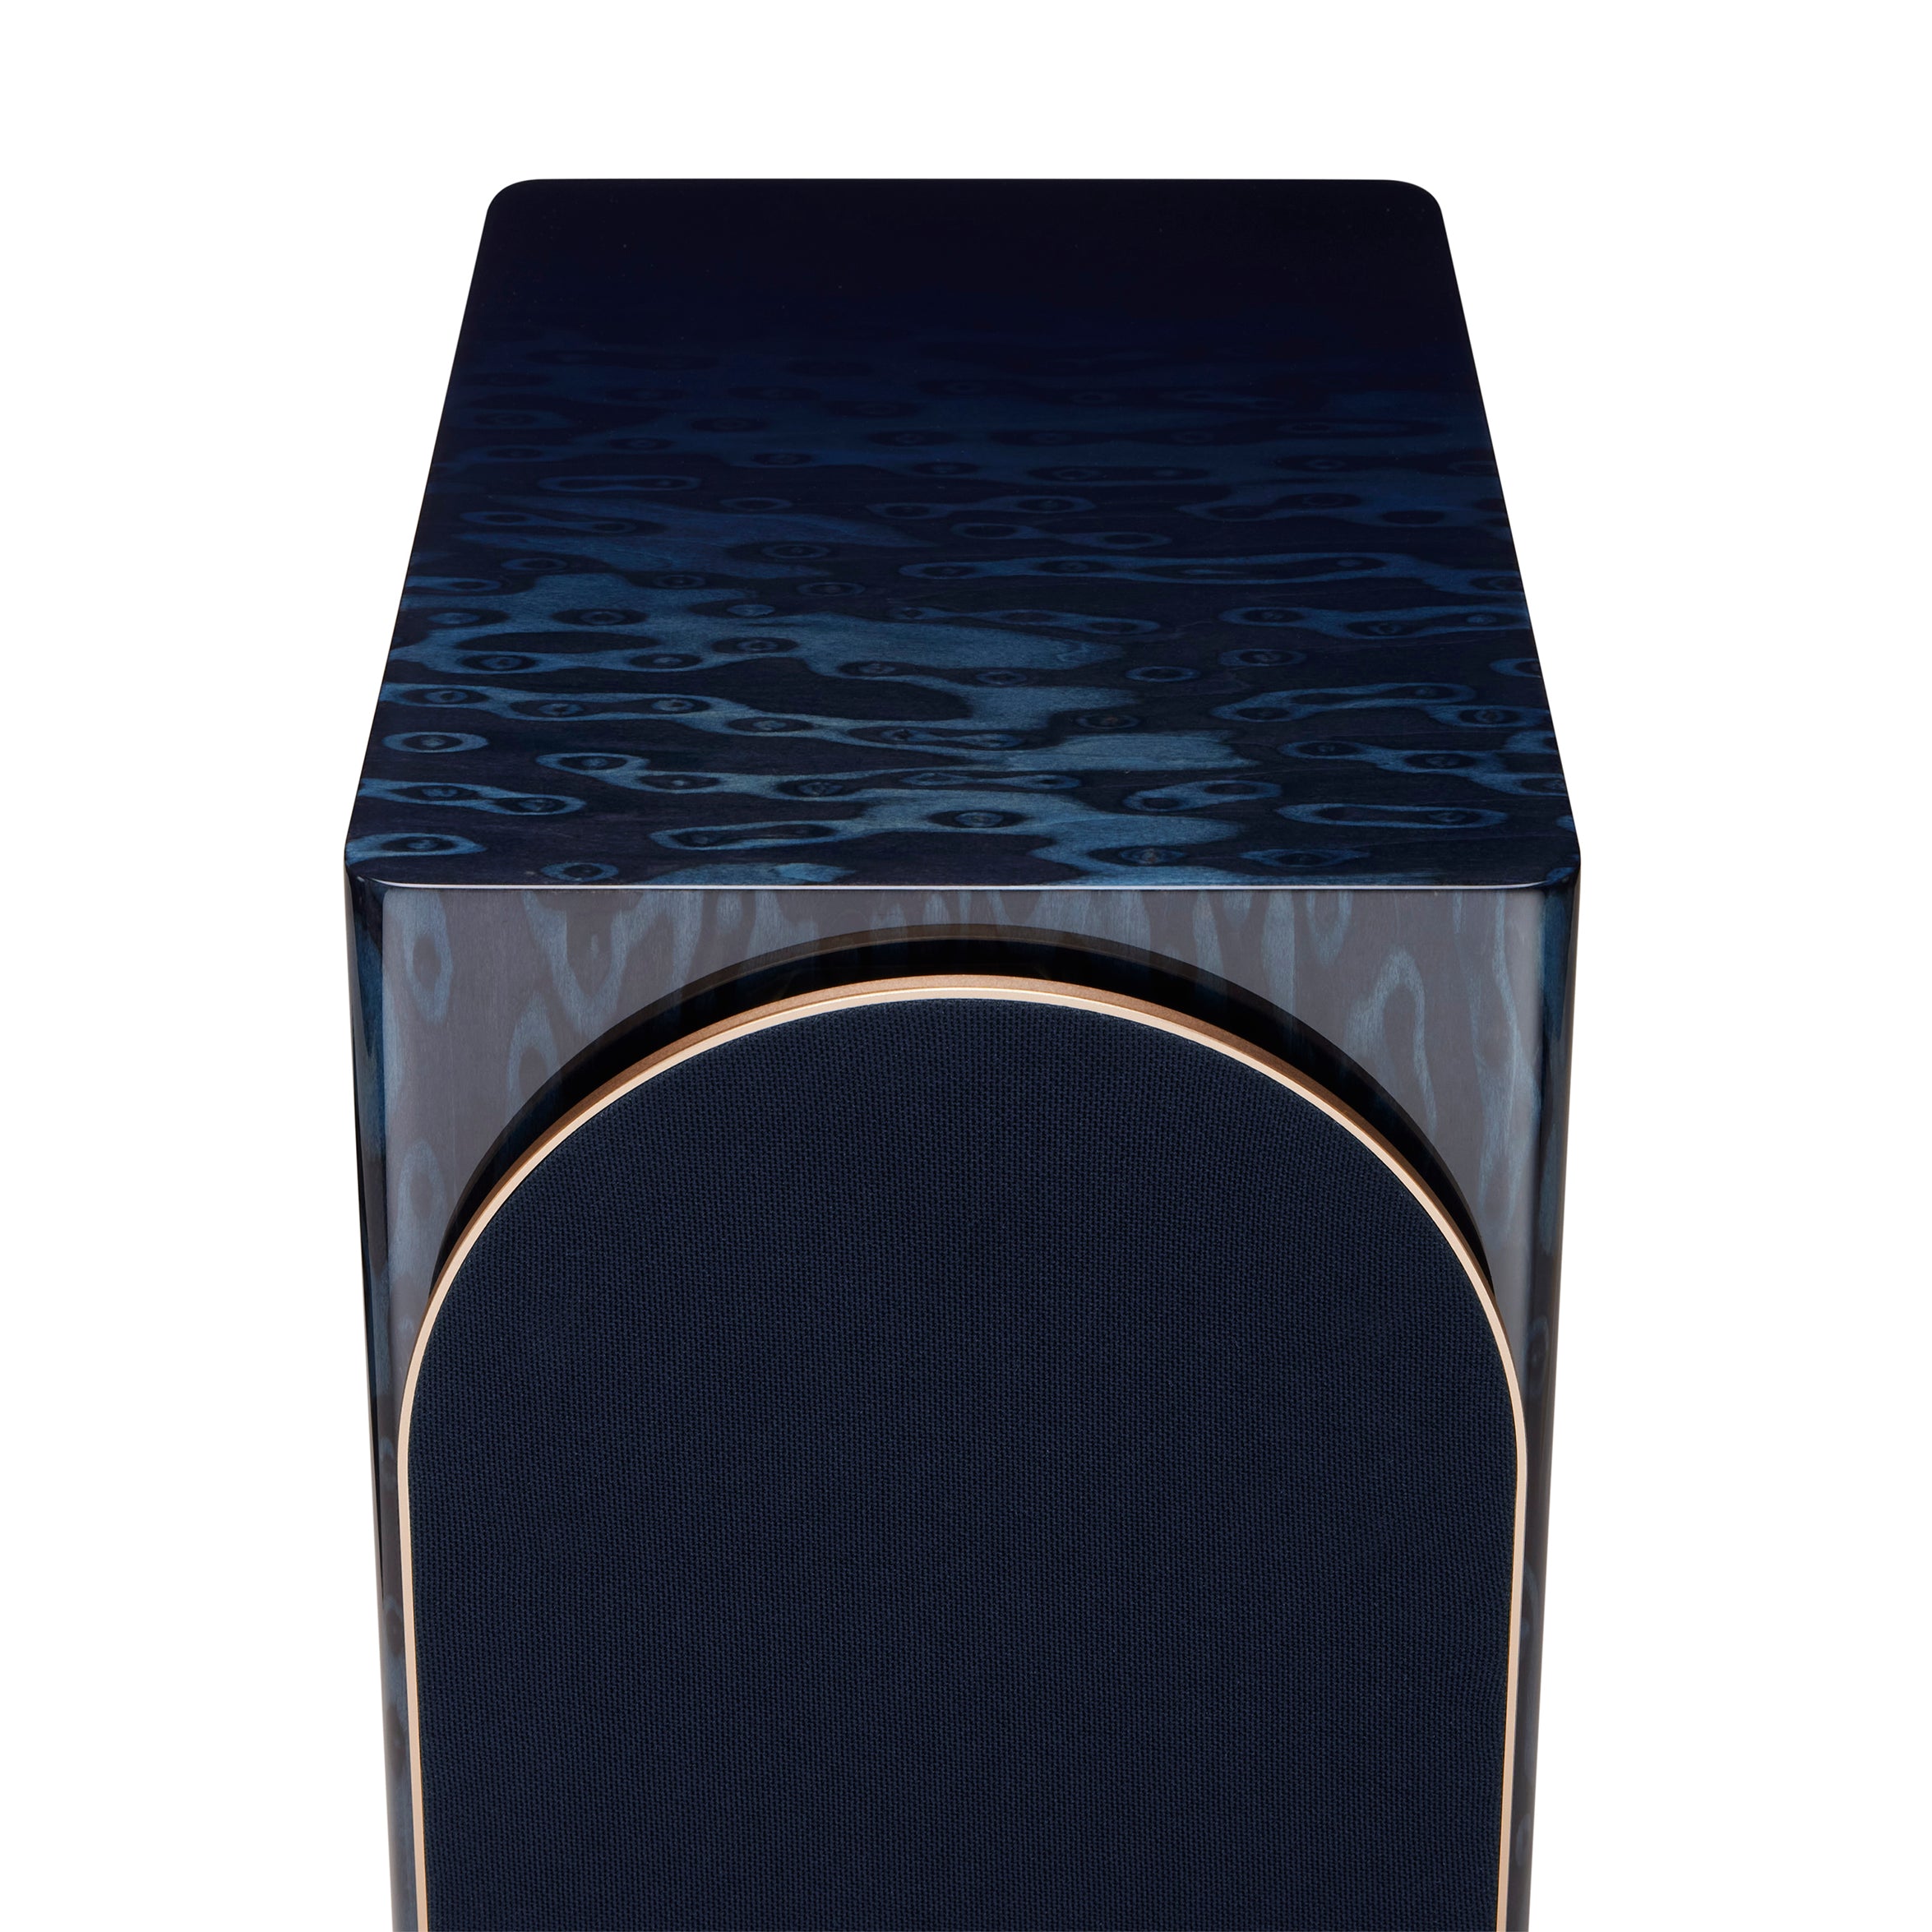 triangle-capella-enceinte-active-wifi-bluetooth-haut-de-gamme-stereo-hub-wisa-streaming-musique-pictures-packshot-astral-blue-grille